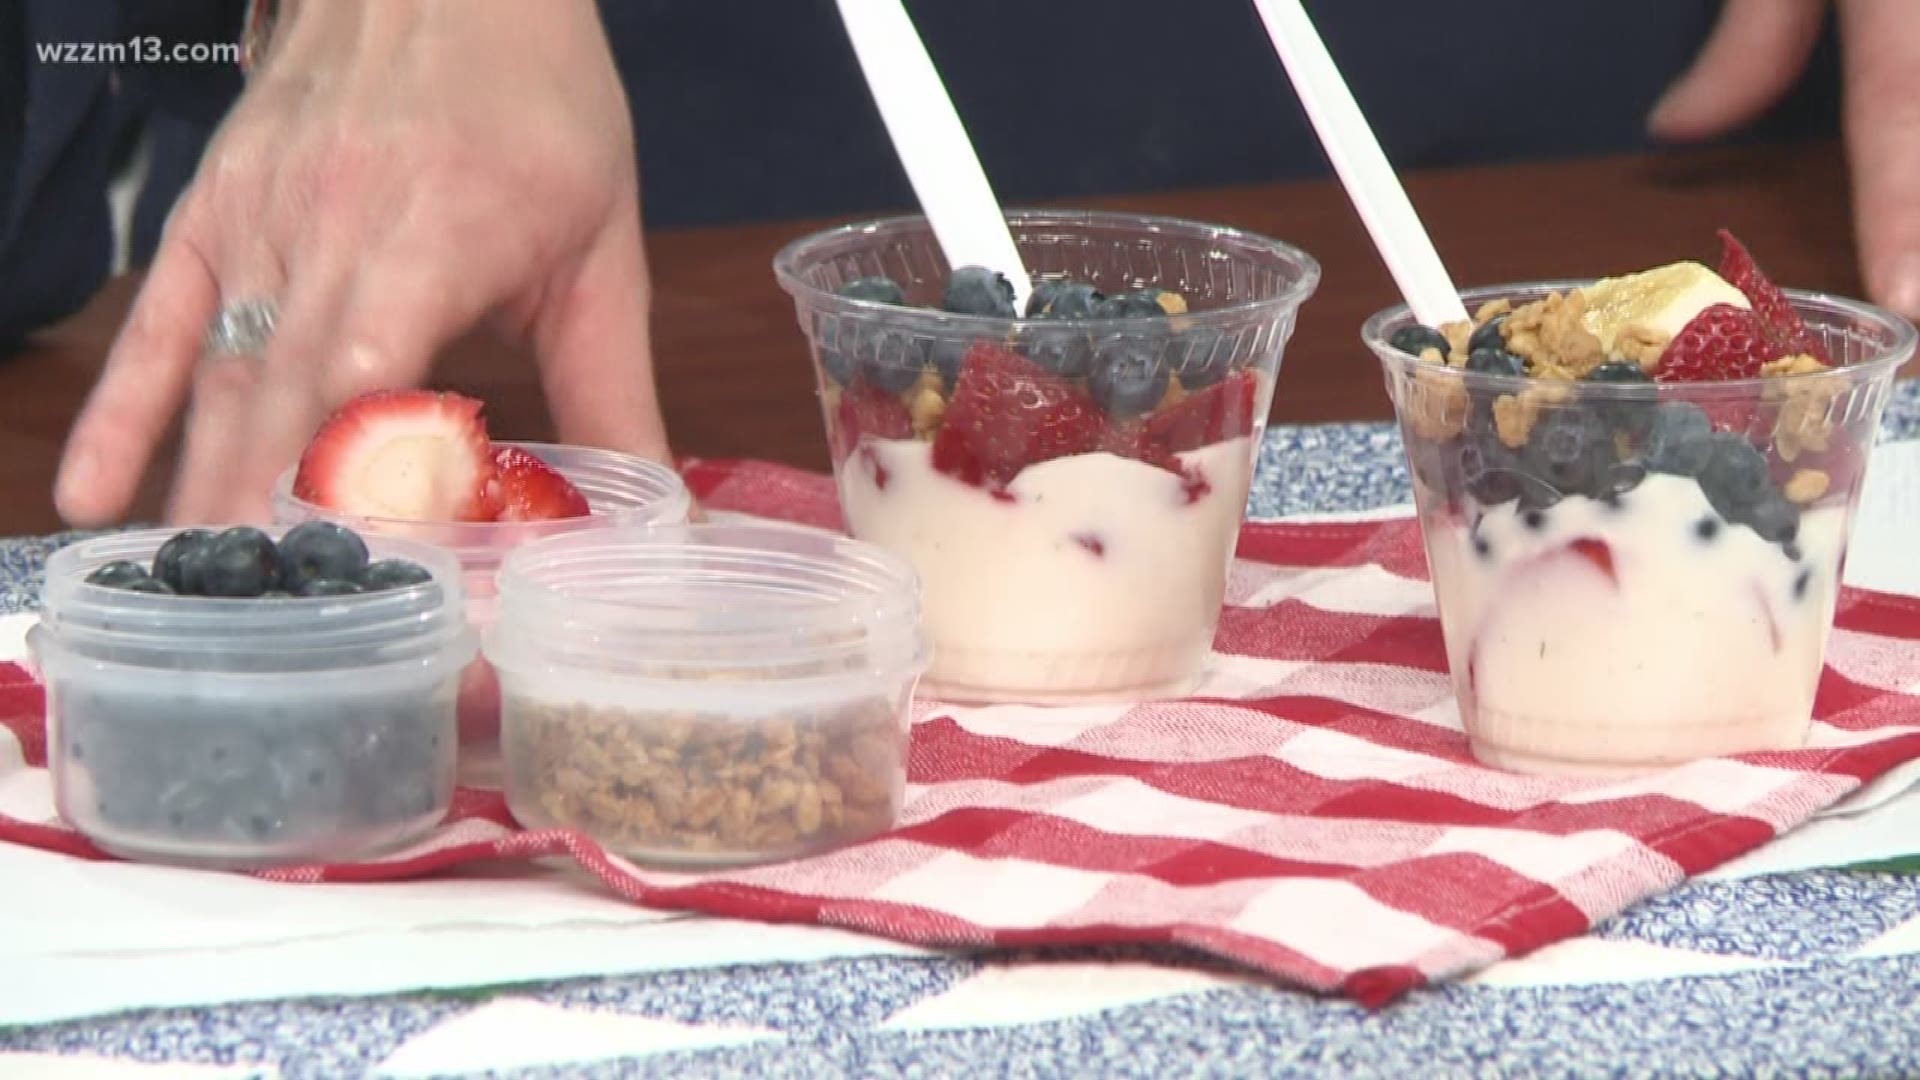 Memorial Day is around the corner and we want to make sure you're ready for all those hungry guests coming over to celebrate. Registered Dietitian Wendy Brookhouse from the McCahill Group to show us some festive and healthy options!